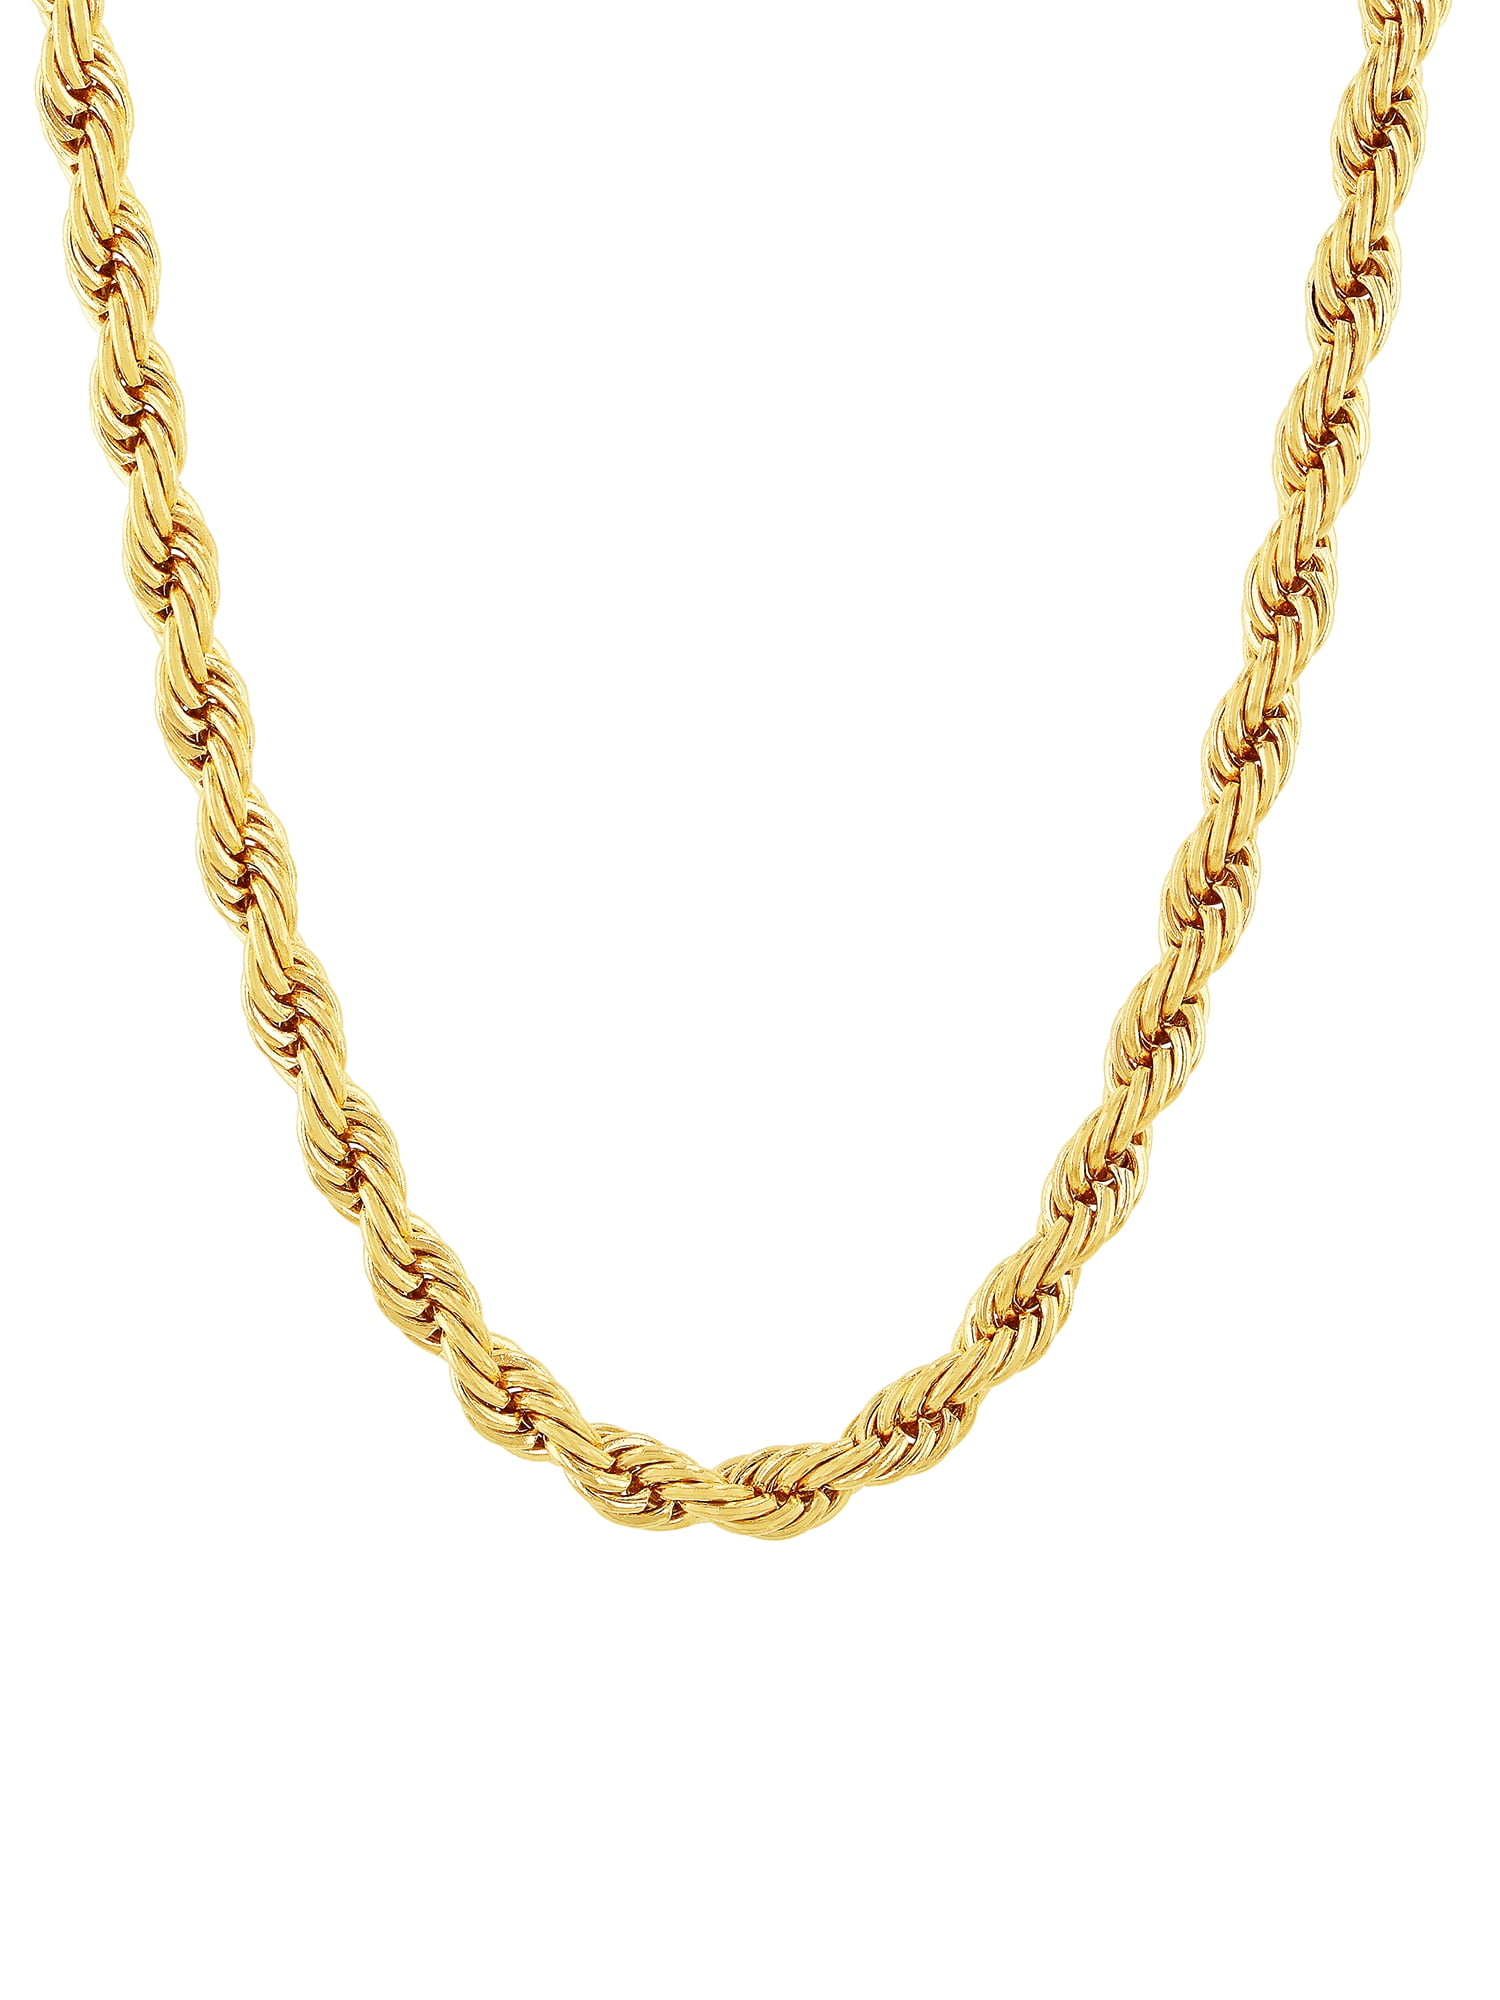 Men's Gold-Tone Stainless Steel Rope Link Chain Necklace